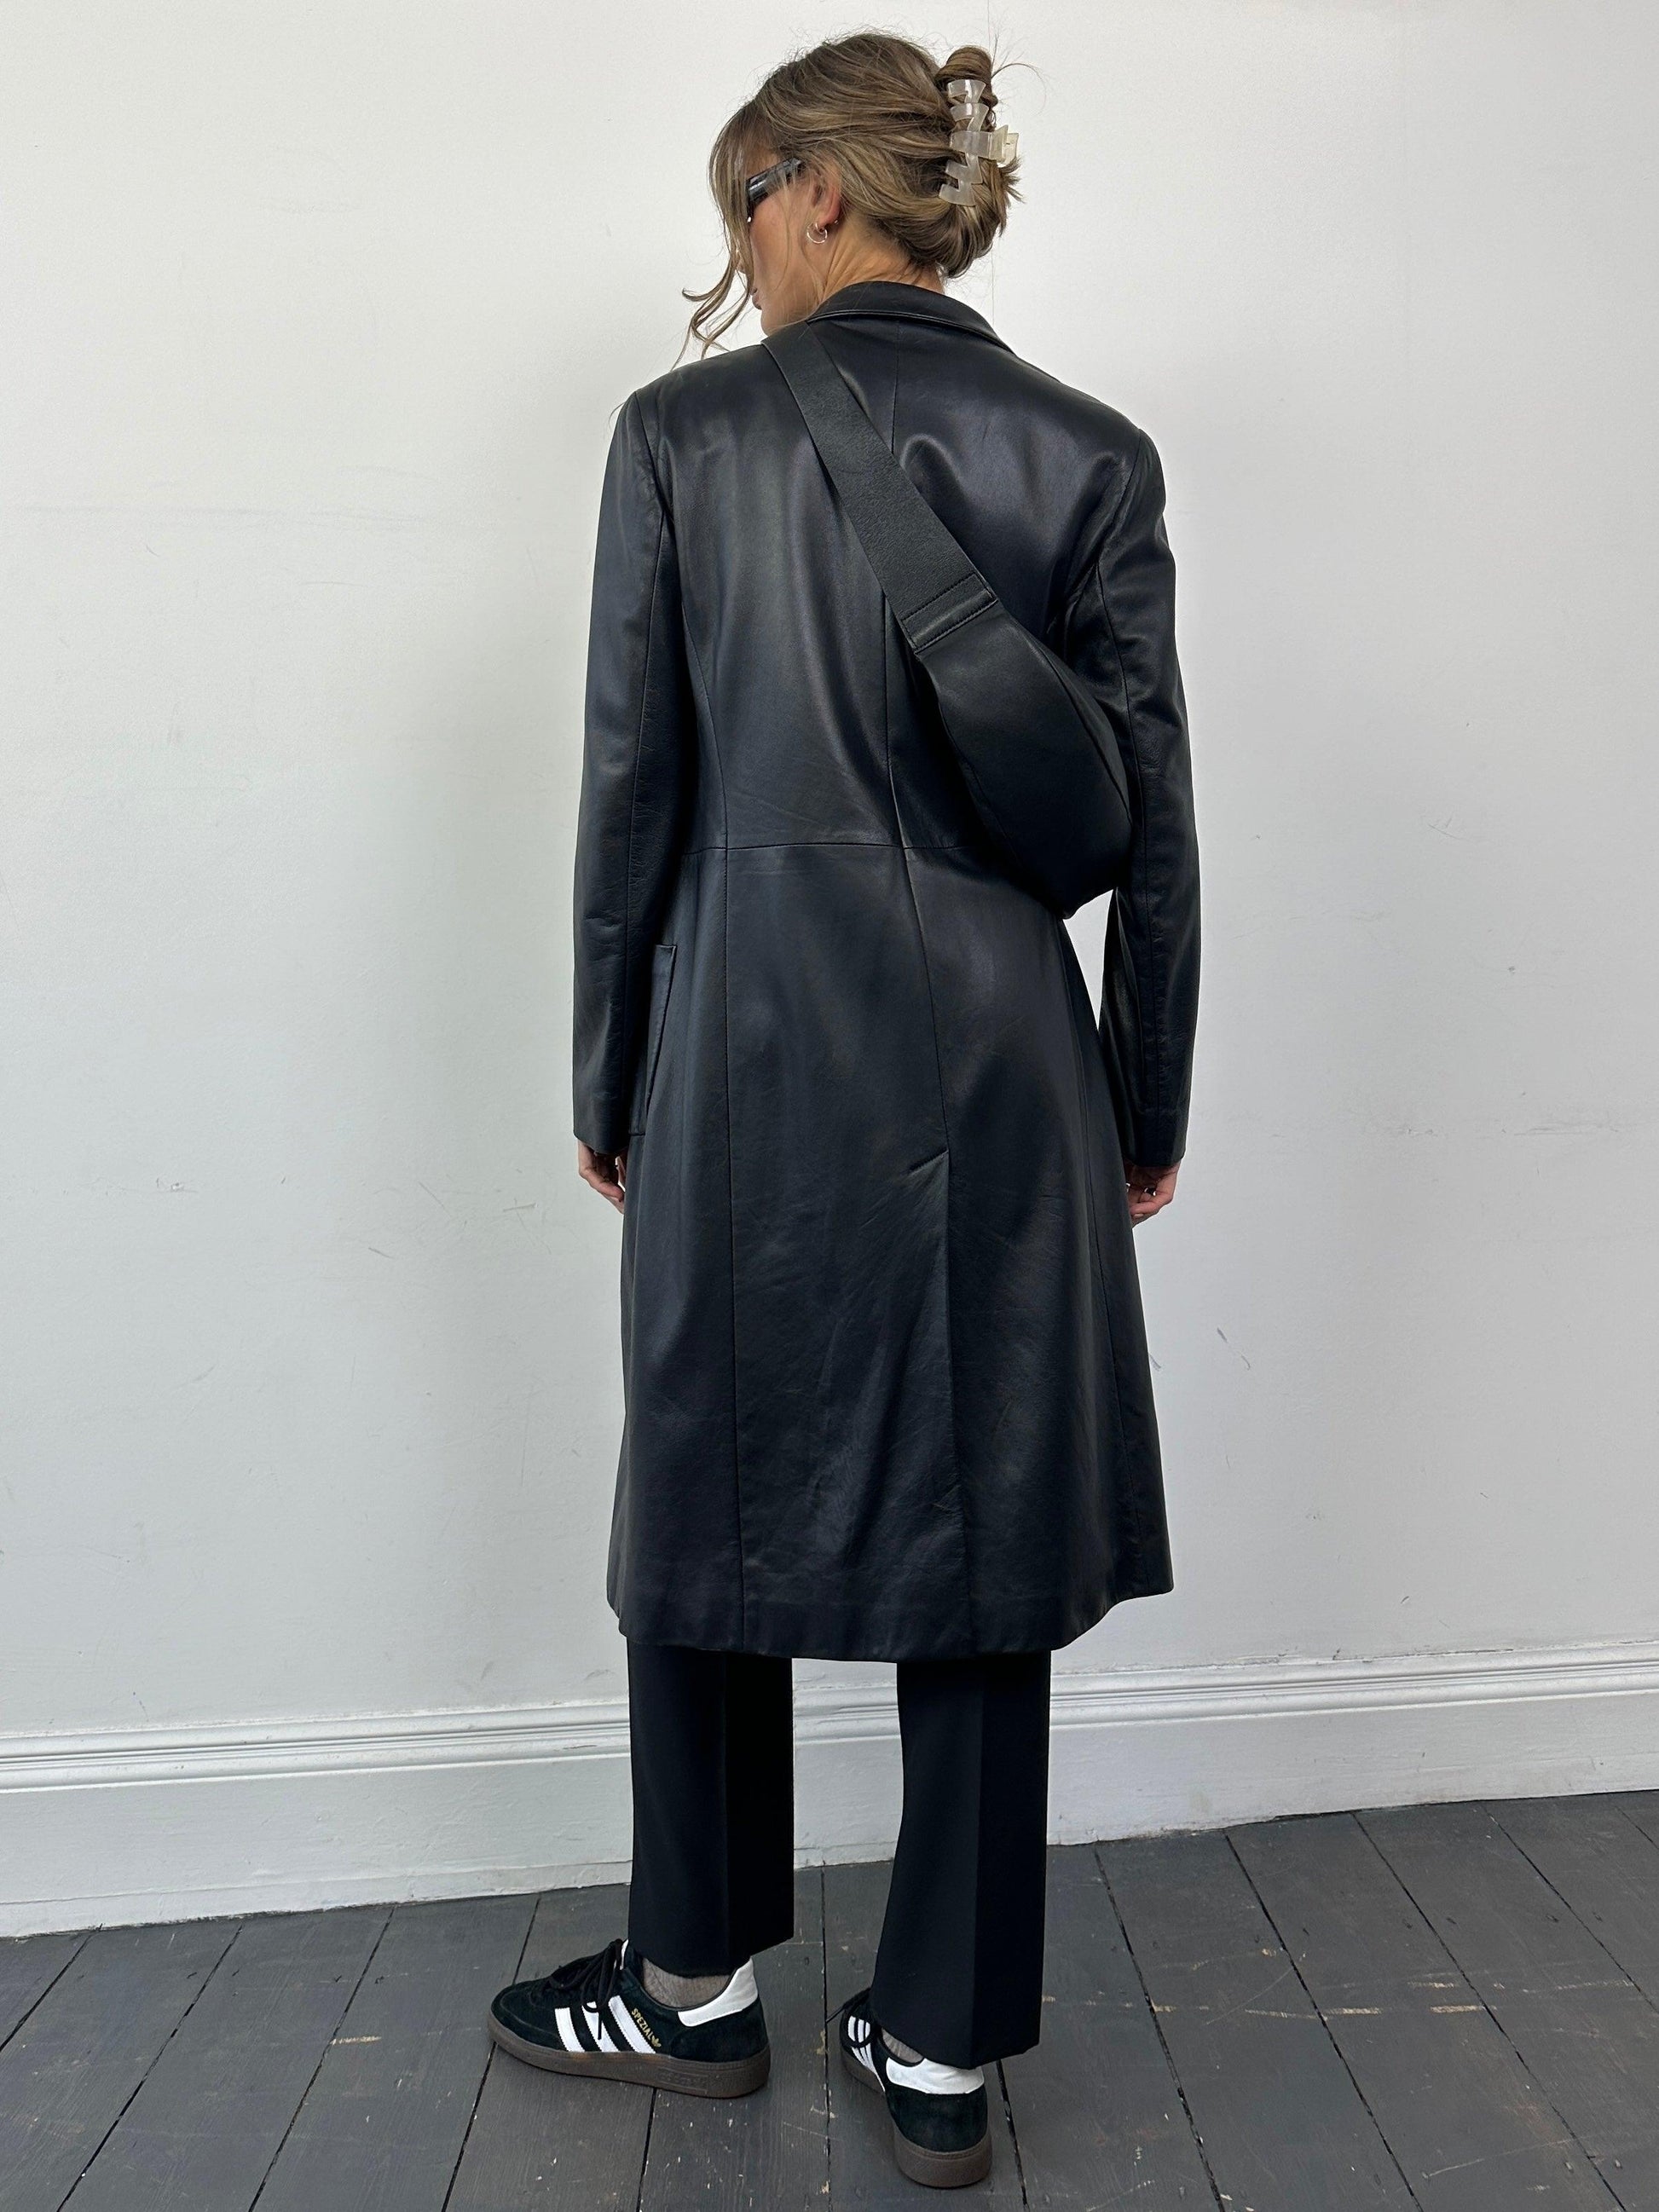 Max Mara Leather Trench Coat - M - Known Source